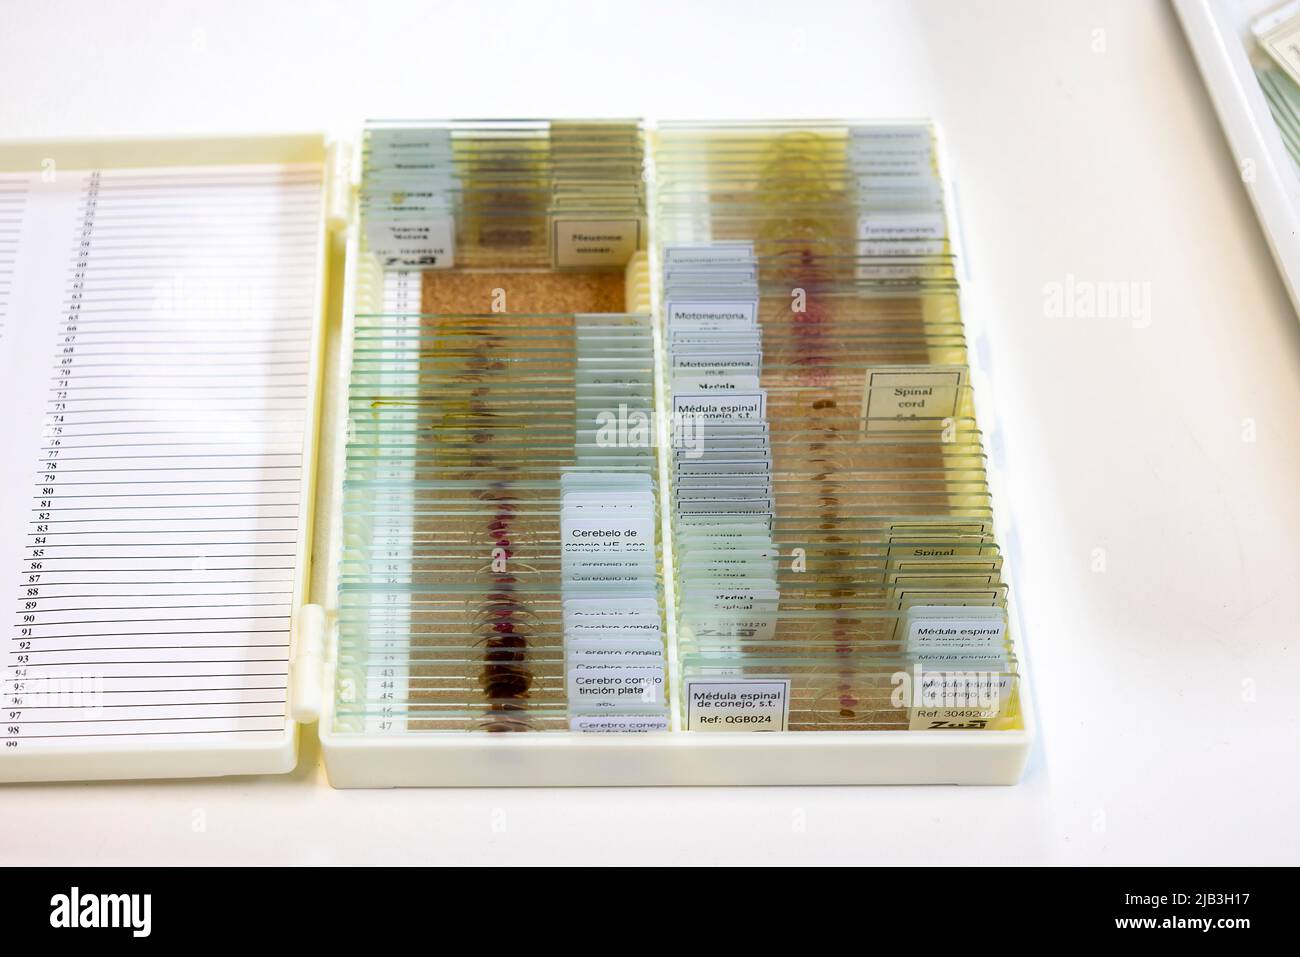 Huelva, Spain - April 28, 2022: Detail of microscope slides in a box for students education Stock Photo